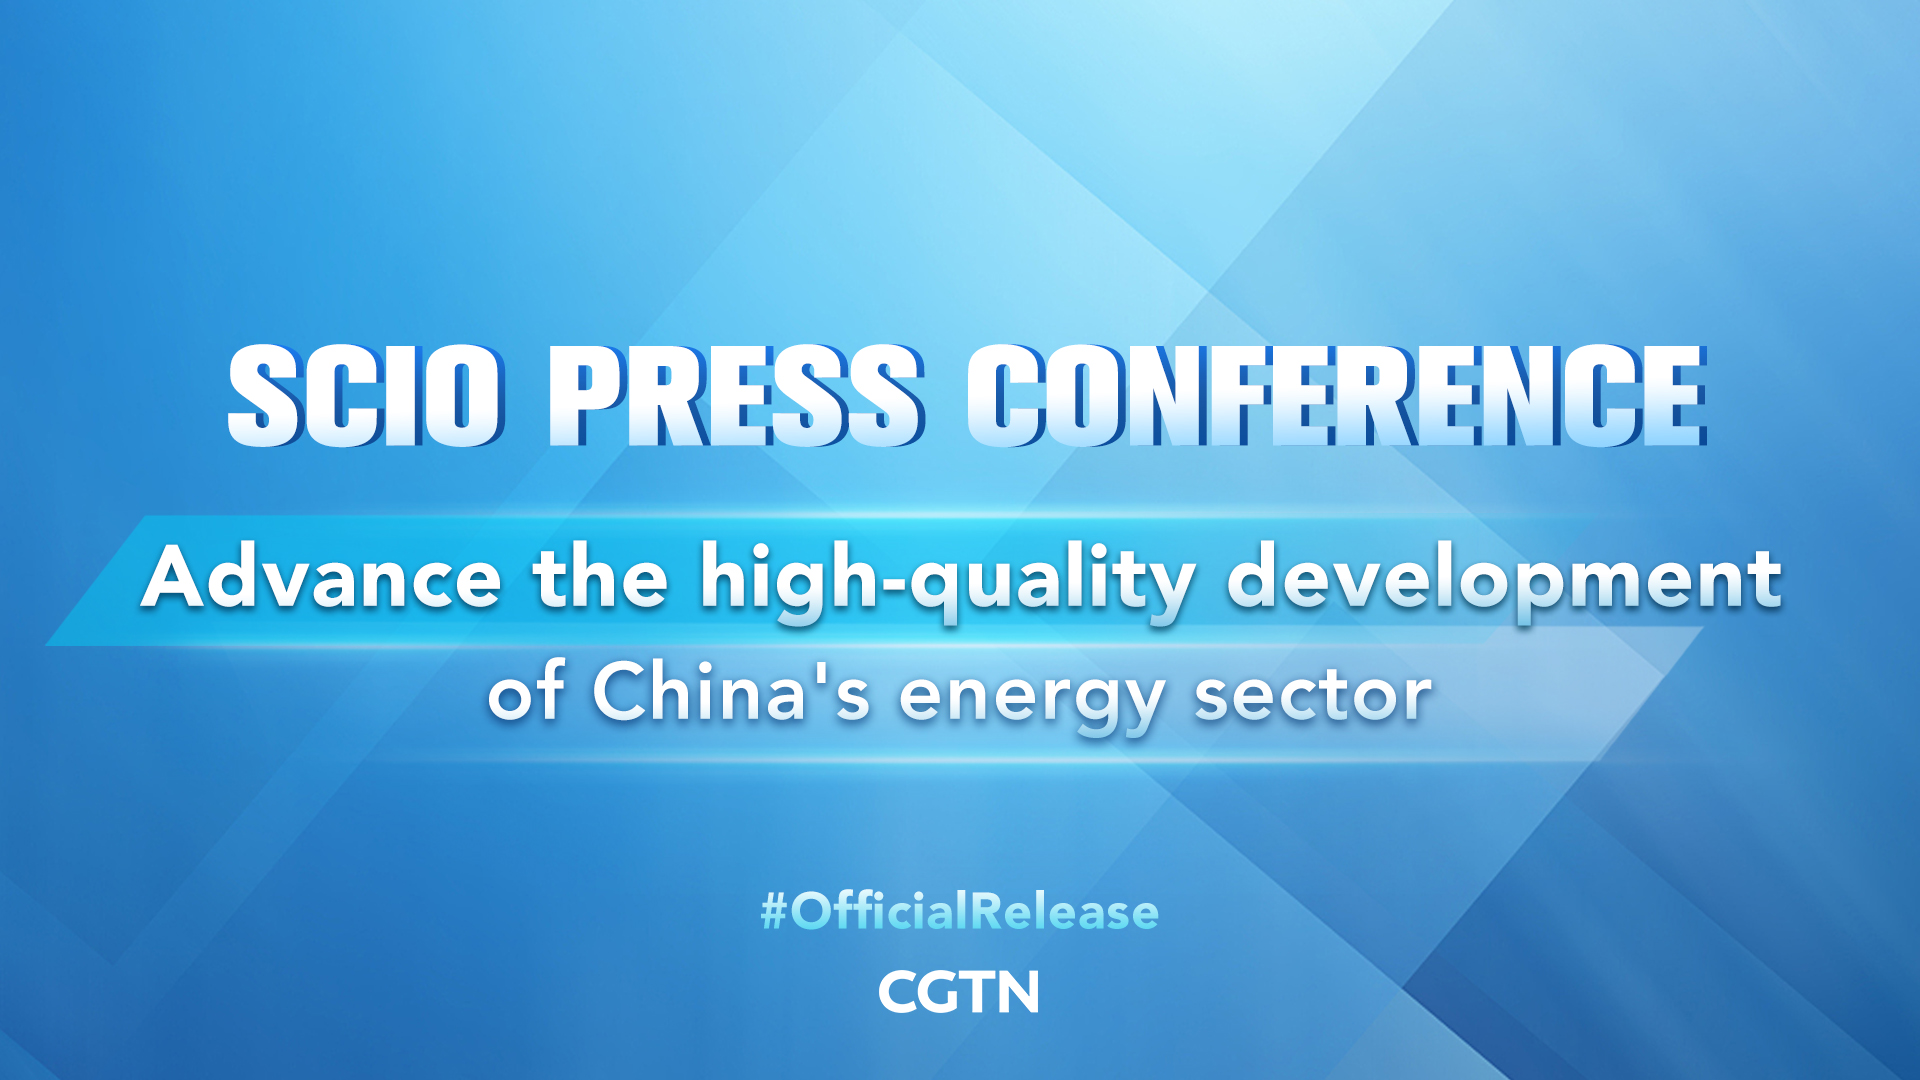 Live: SCIO briefs on advancing high-quality development of China's energy sector